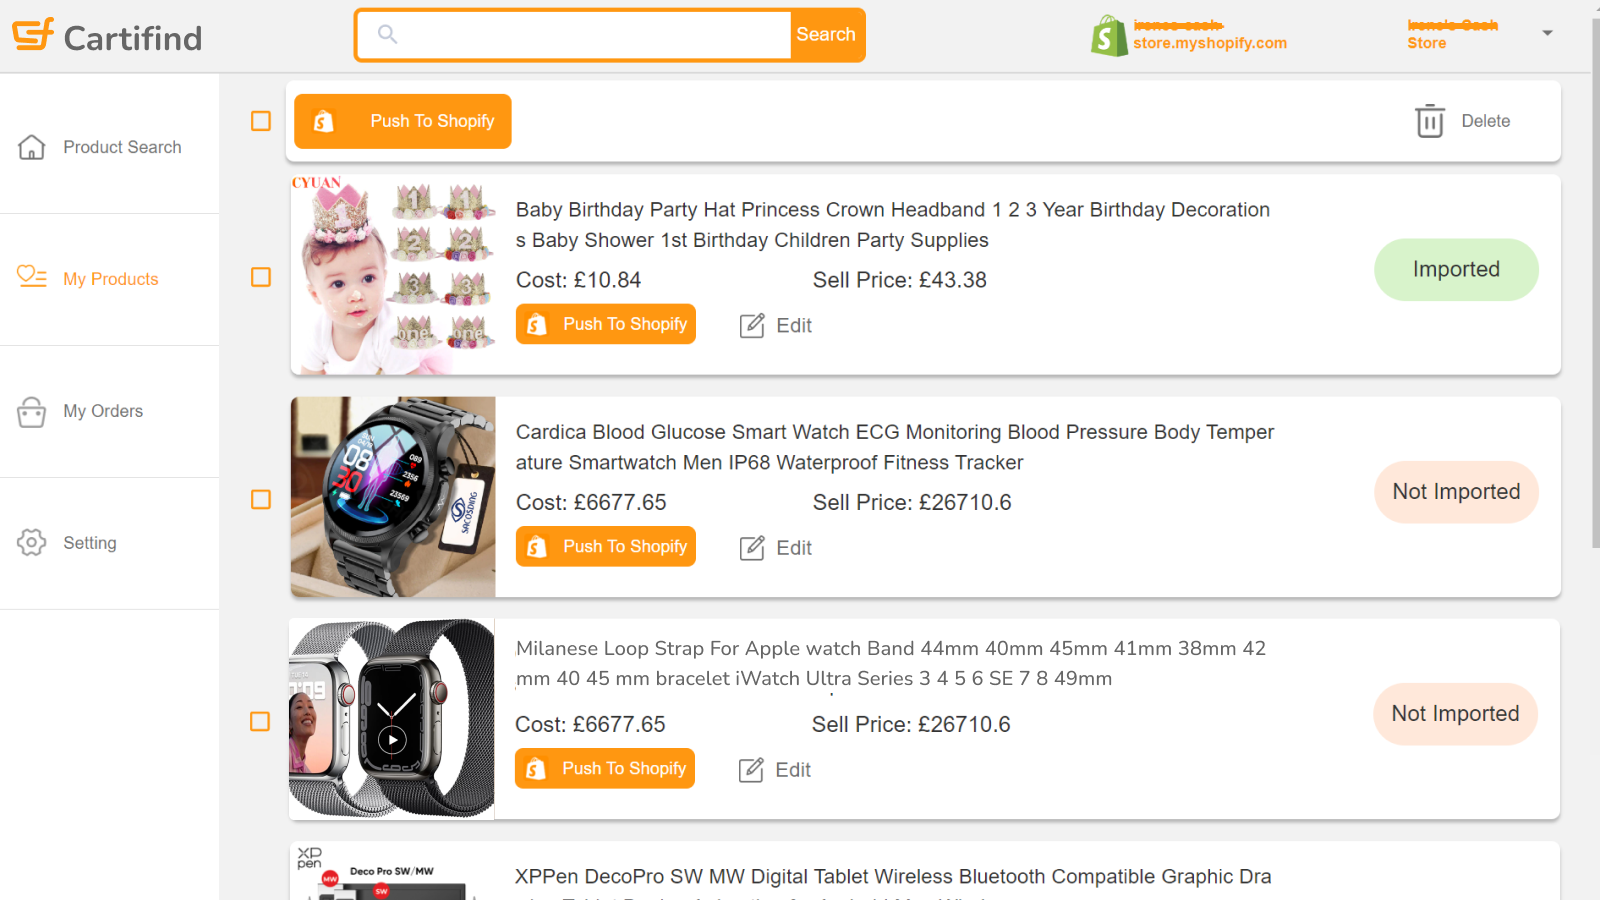 My Products -Cartifind saved products lists